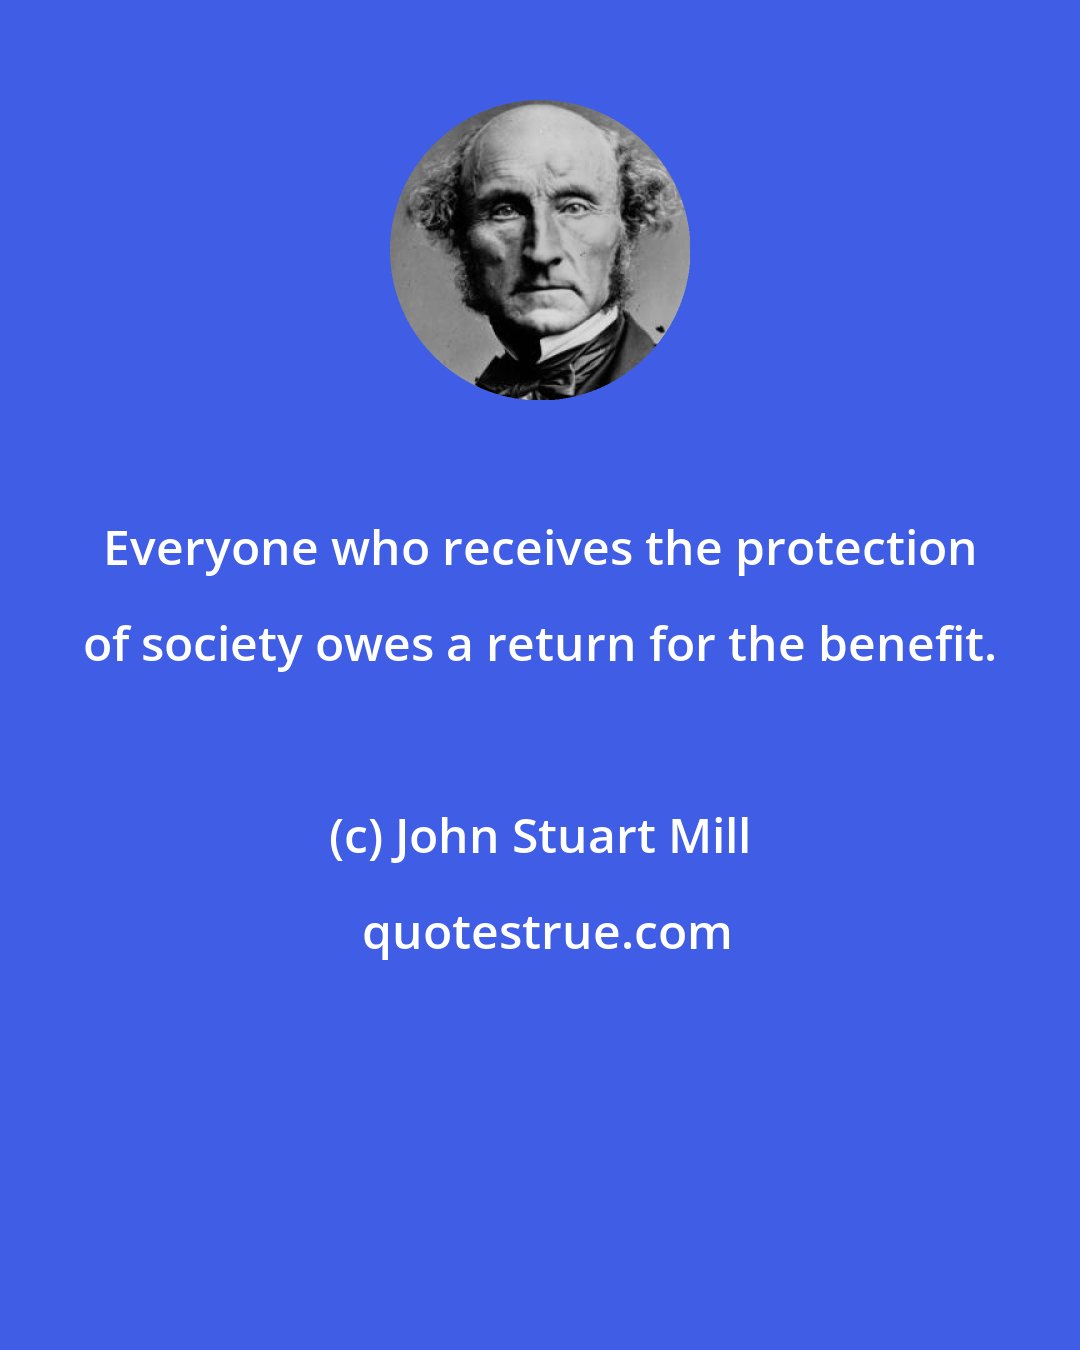 John Stuart Mill: Everyone who receives the protection of society owes a return for the benefit.